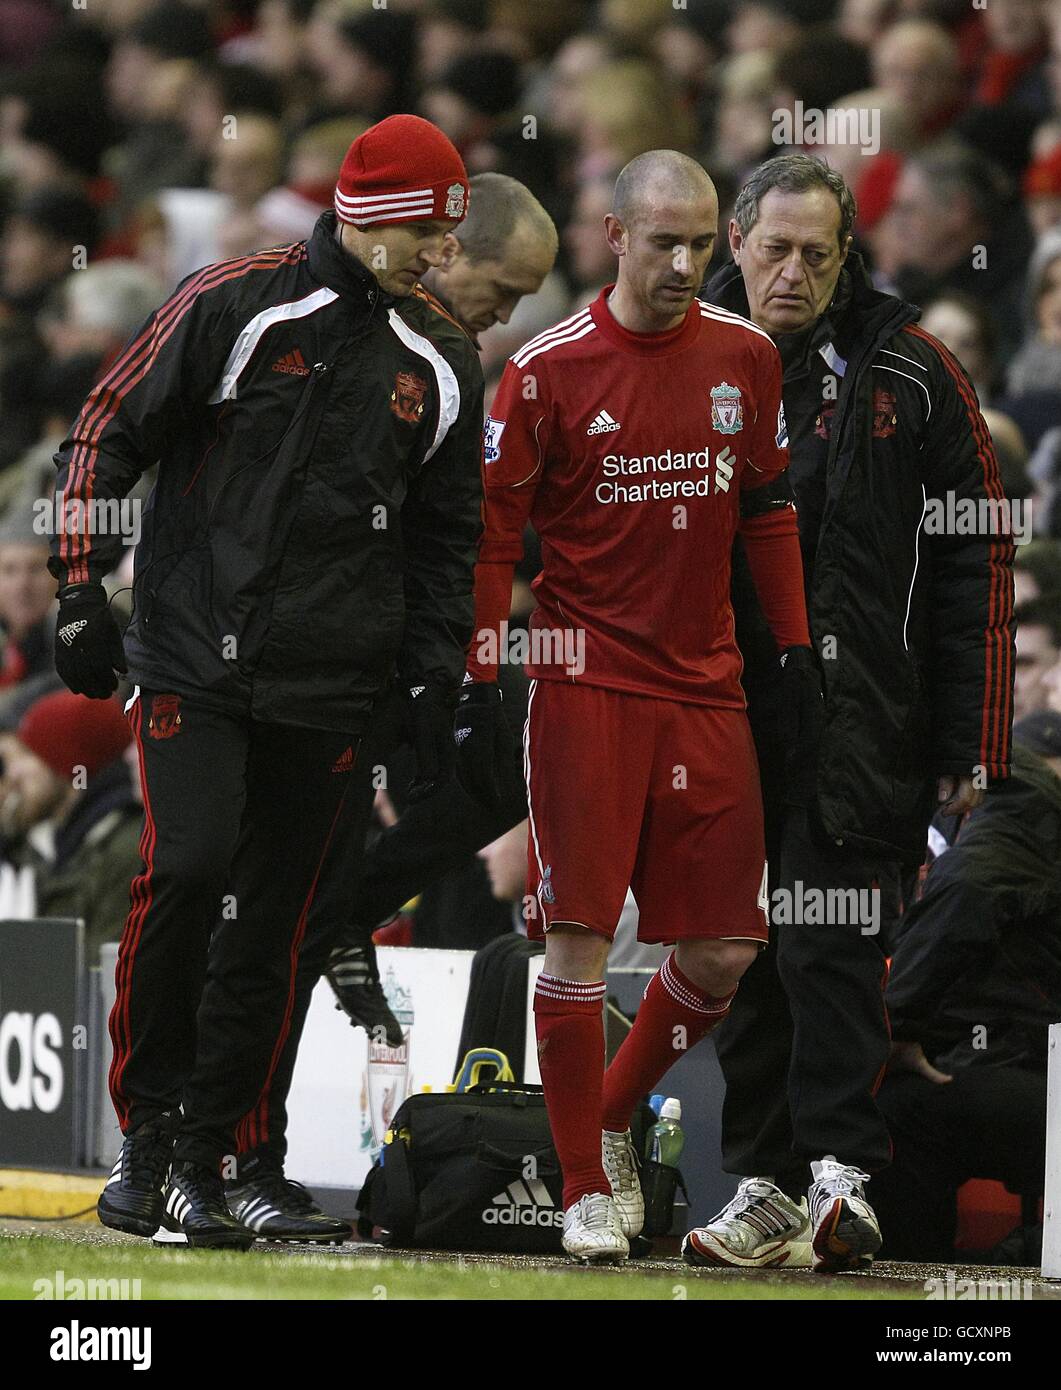 Soccer - Barclays Premier League - Liverpool v Bolton Wanderers - Anfield. Liverpool's Raul Meireles (centre) walks off the pitch after suffering an injury Stock Photo